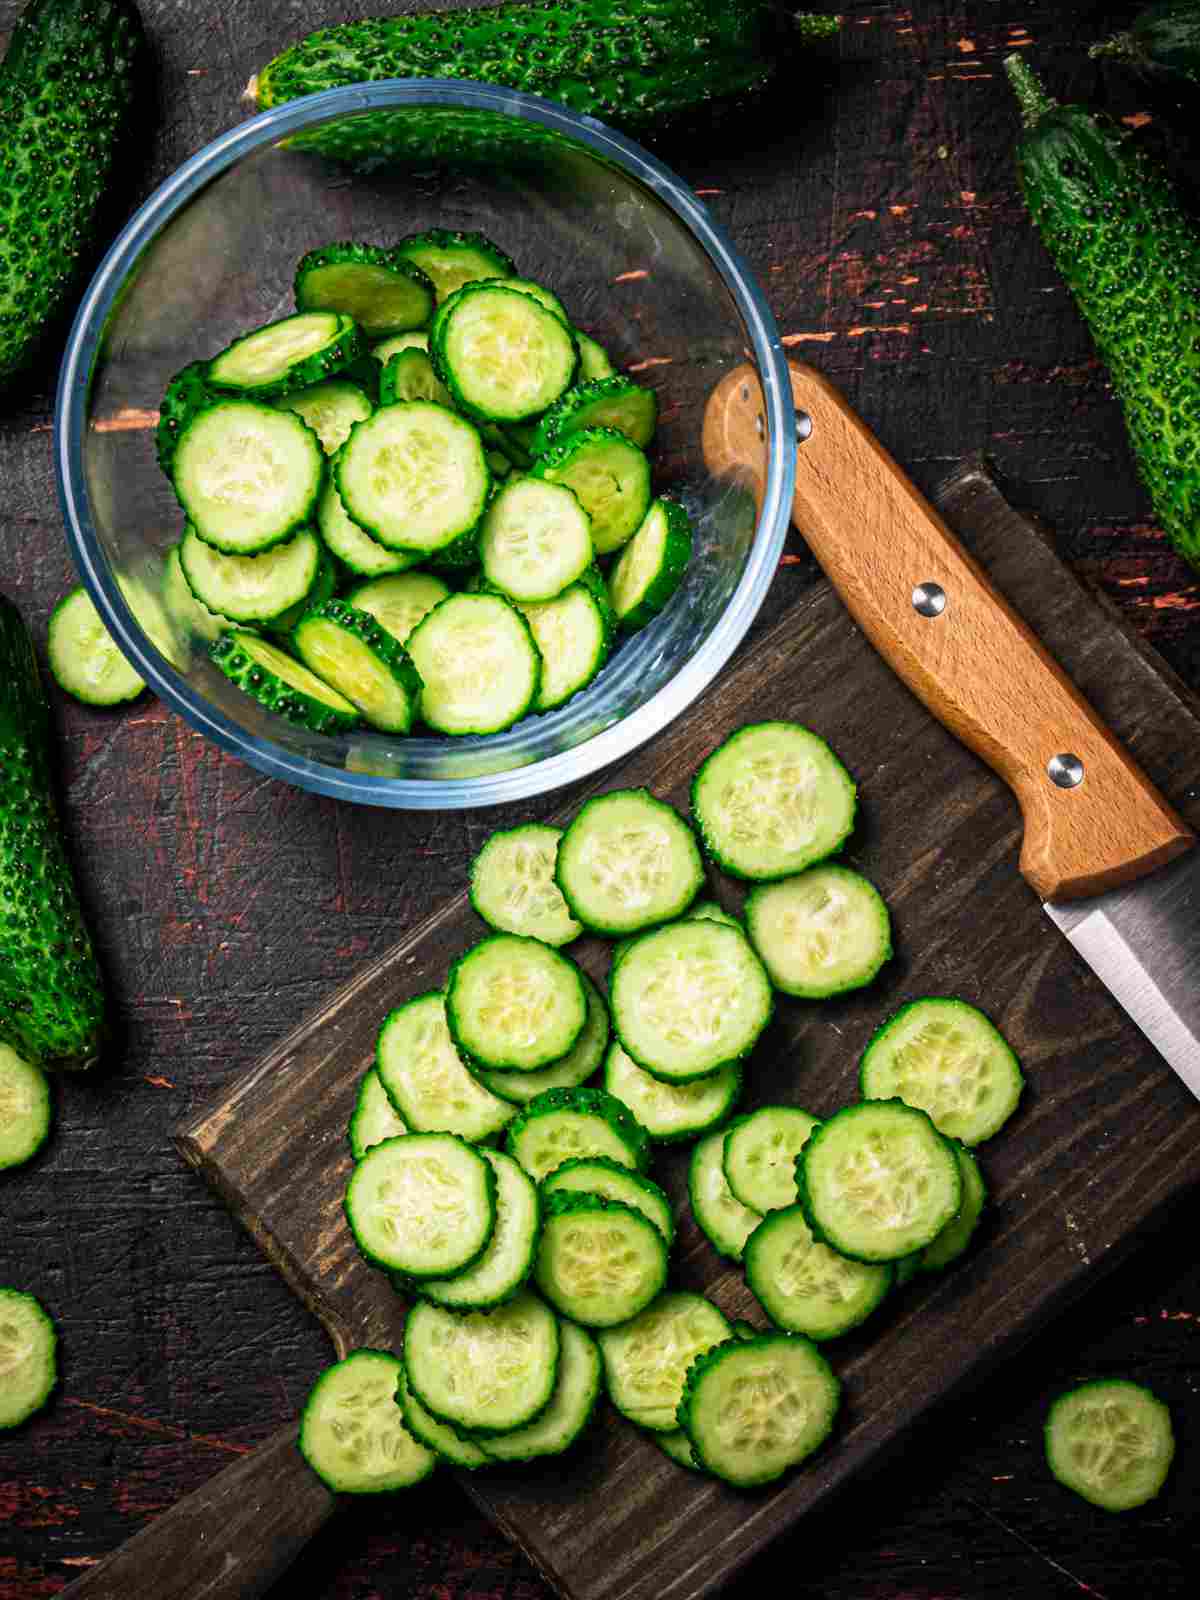 Is Cucumber Good For You